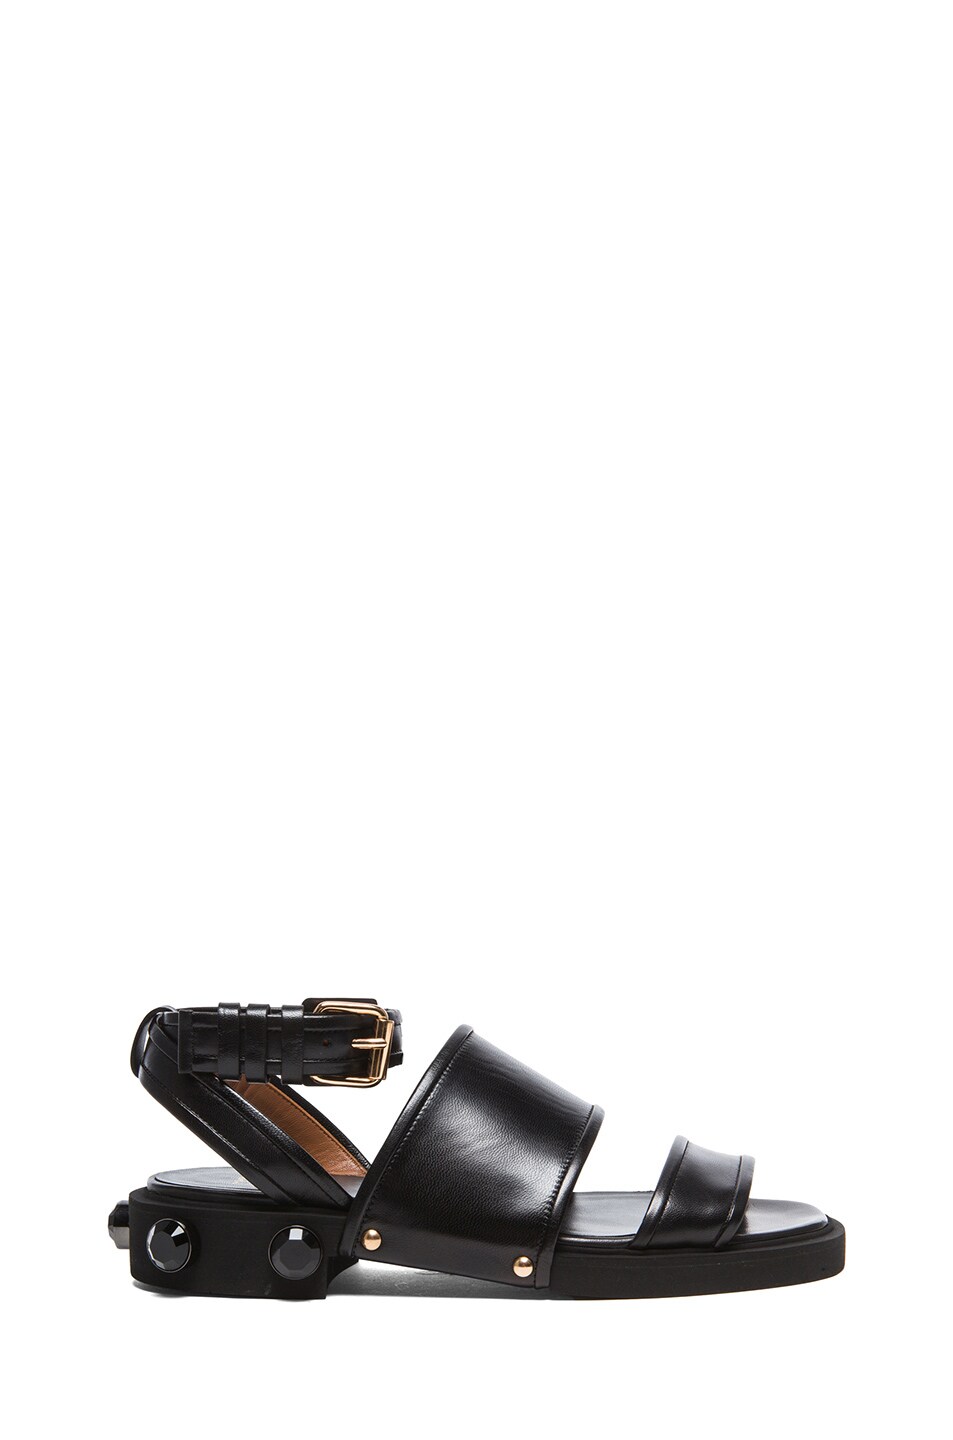 Givenchy Viktor Leather Sandals in Black | FWRD